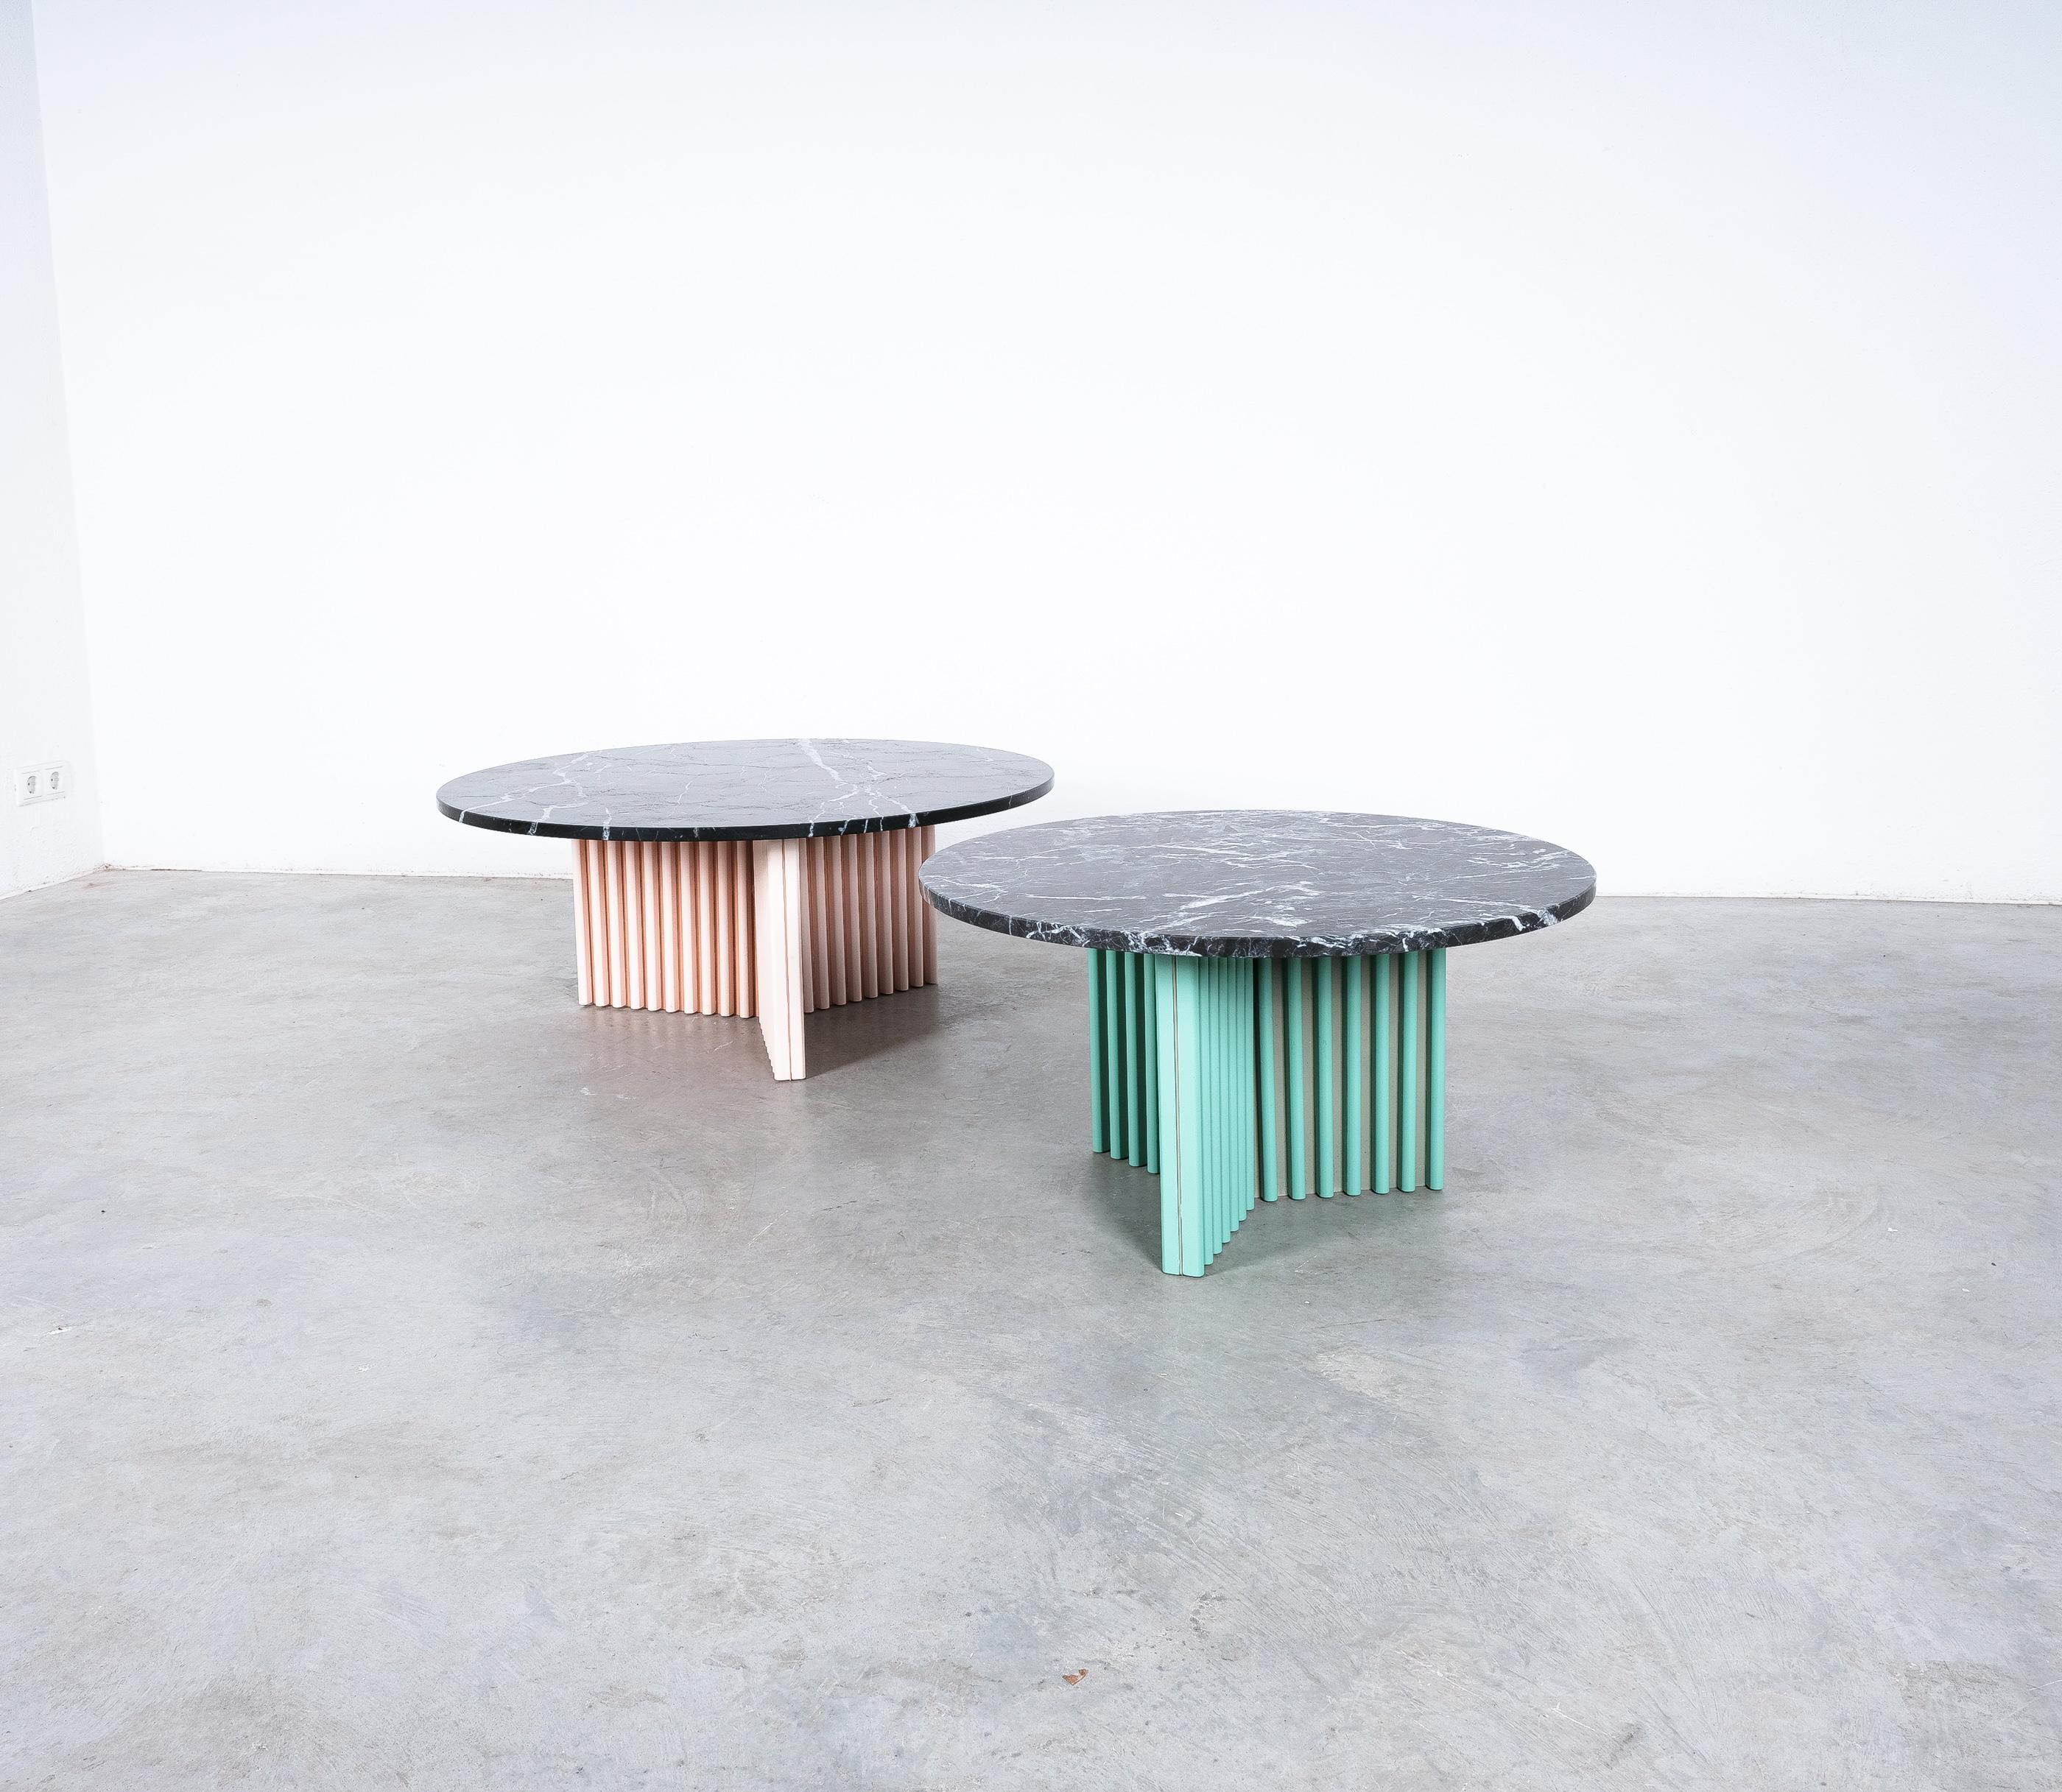 Post-Design pair of tables, bespoke marble tables (2), late 1980's, early 1990's

Sold and priced as a pair.

Pair of unique tables made from round marble tops on triangular shaped colored bases.
The bases are customized, made from stretched